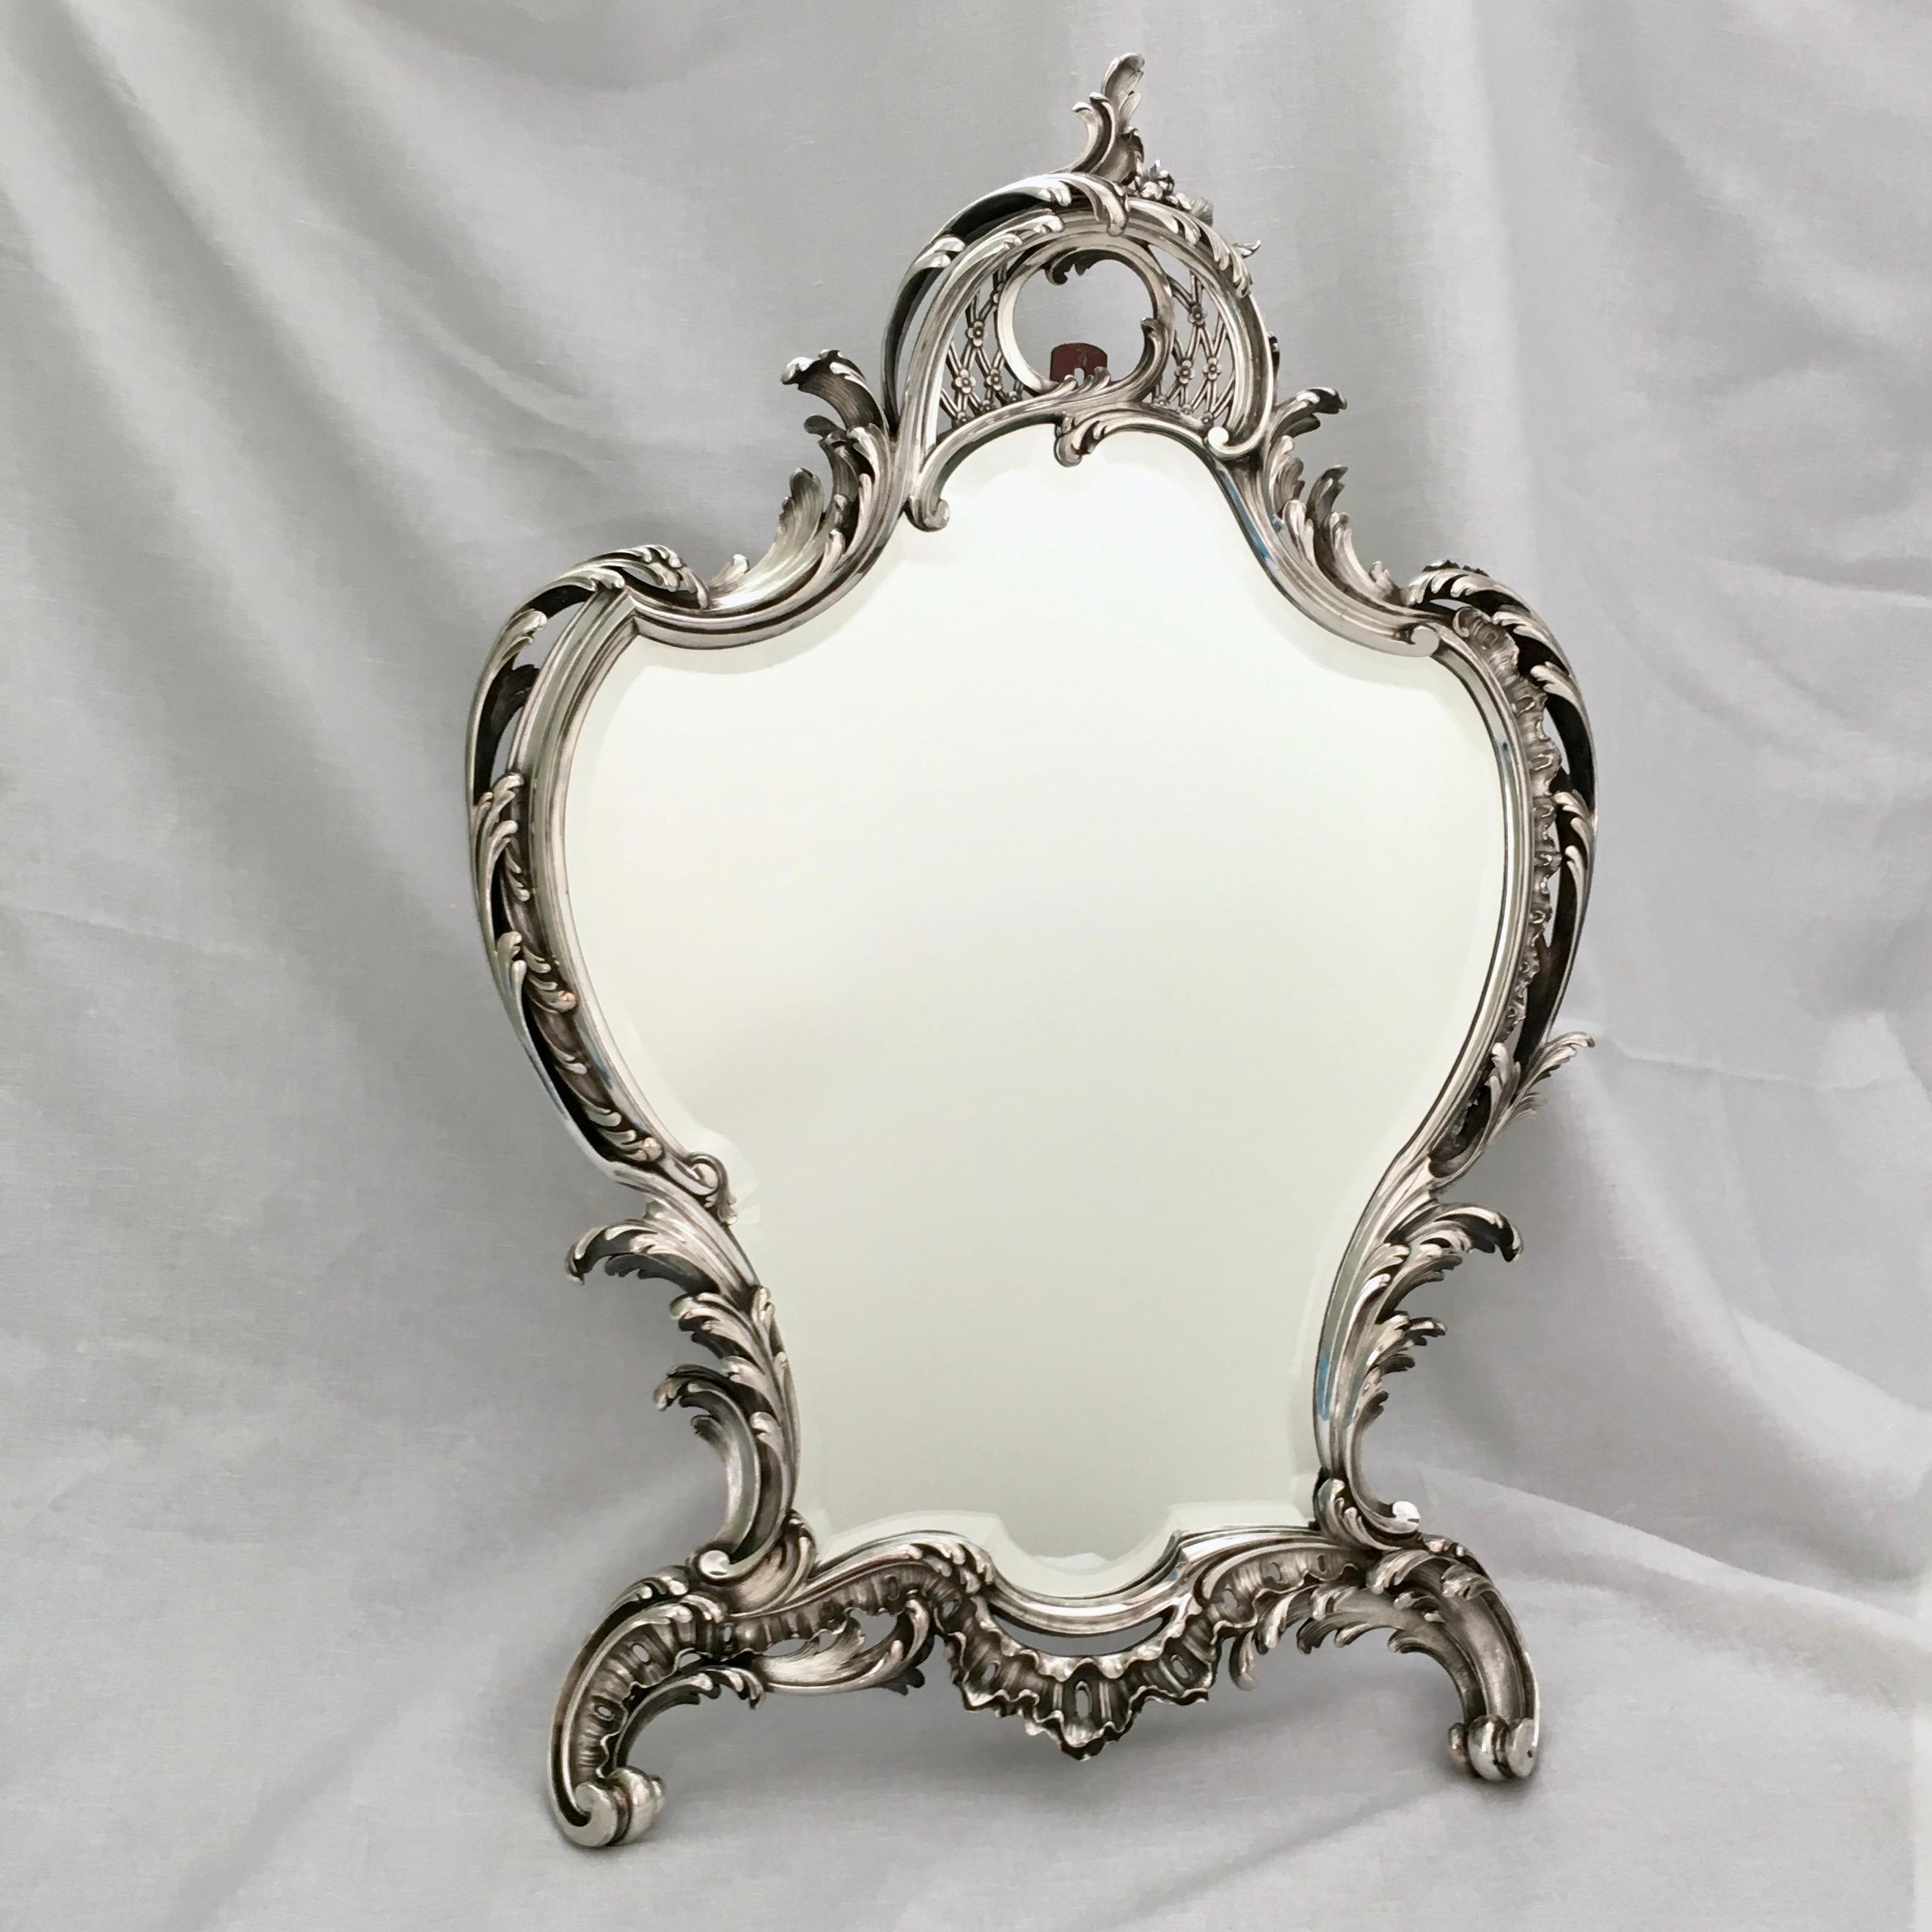 Antique Rococo table mirror by A. Aucoc, Paris, 1900.
This masterpiece was made in the workshops of A. Aucoc, in Paris. The mirror is signed and in very good condition. Both in detail, the design and the materials used bear witness of the highest